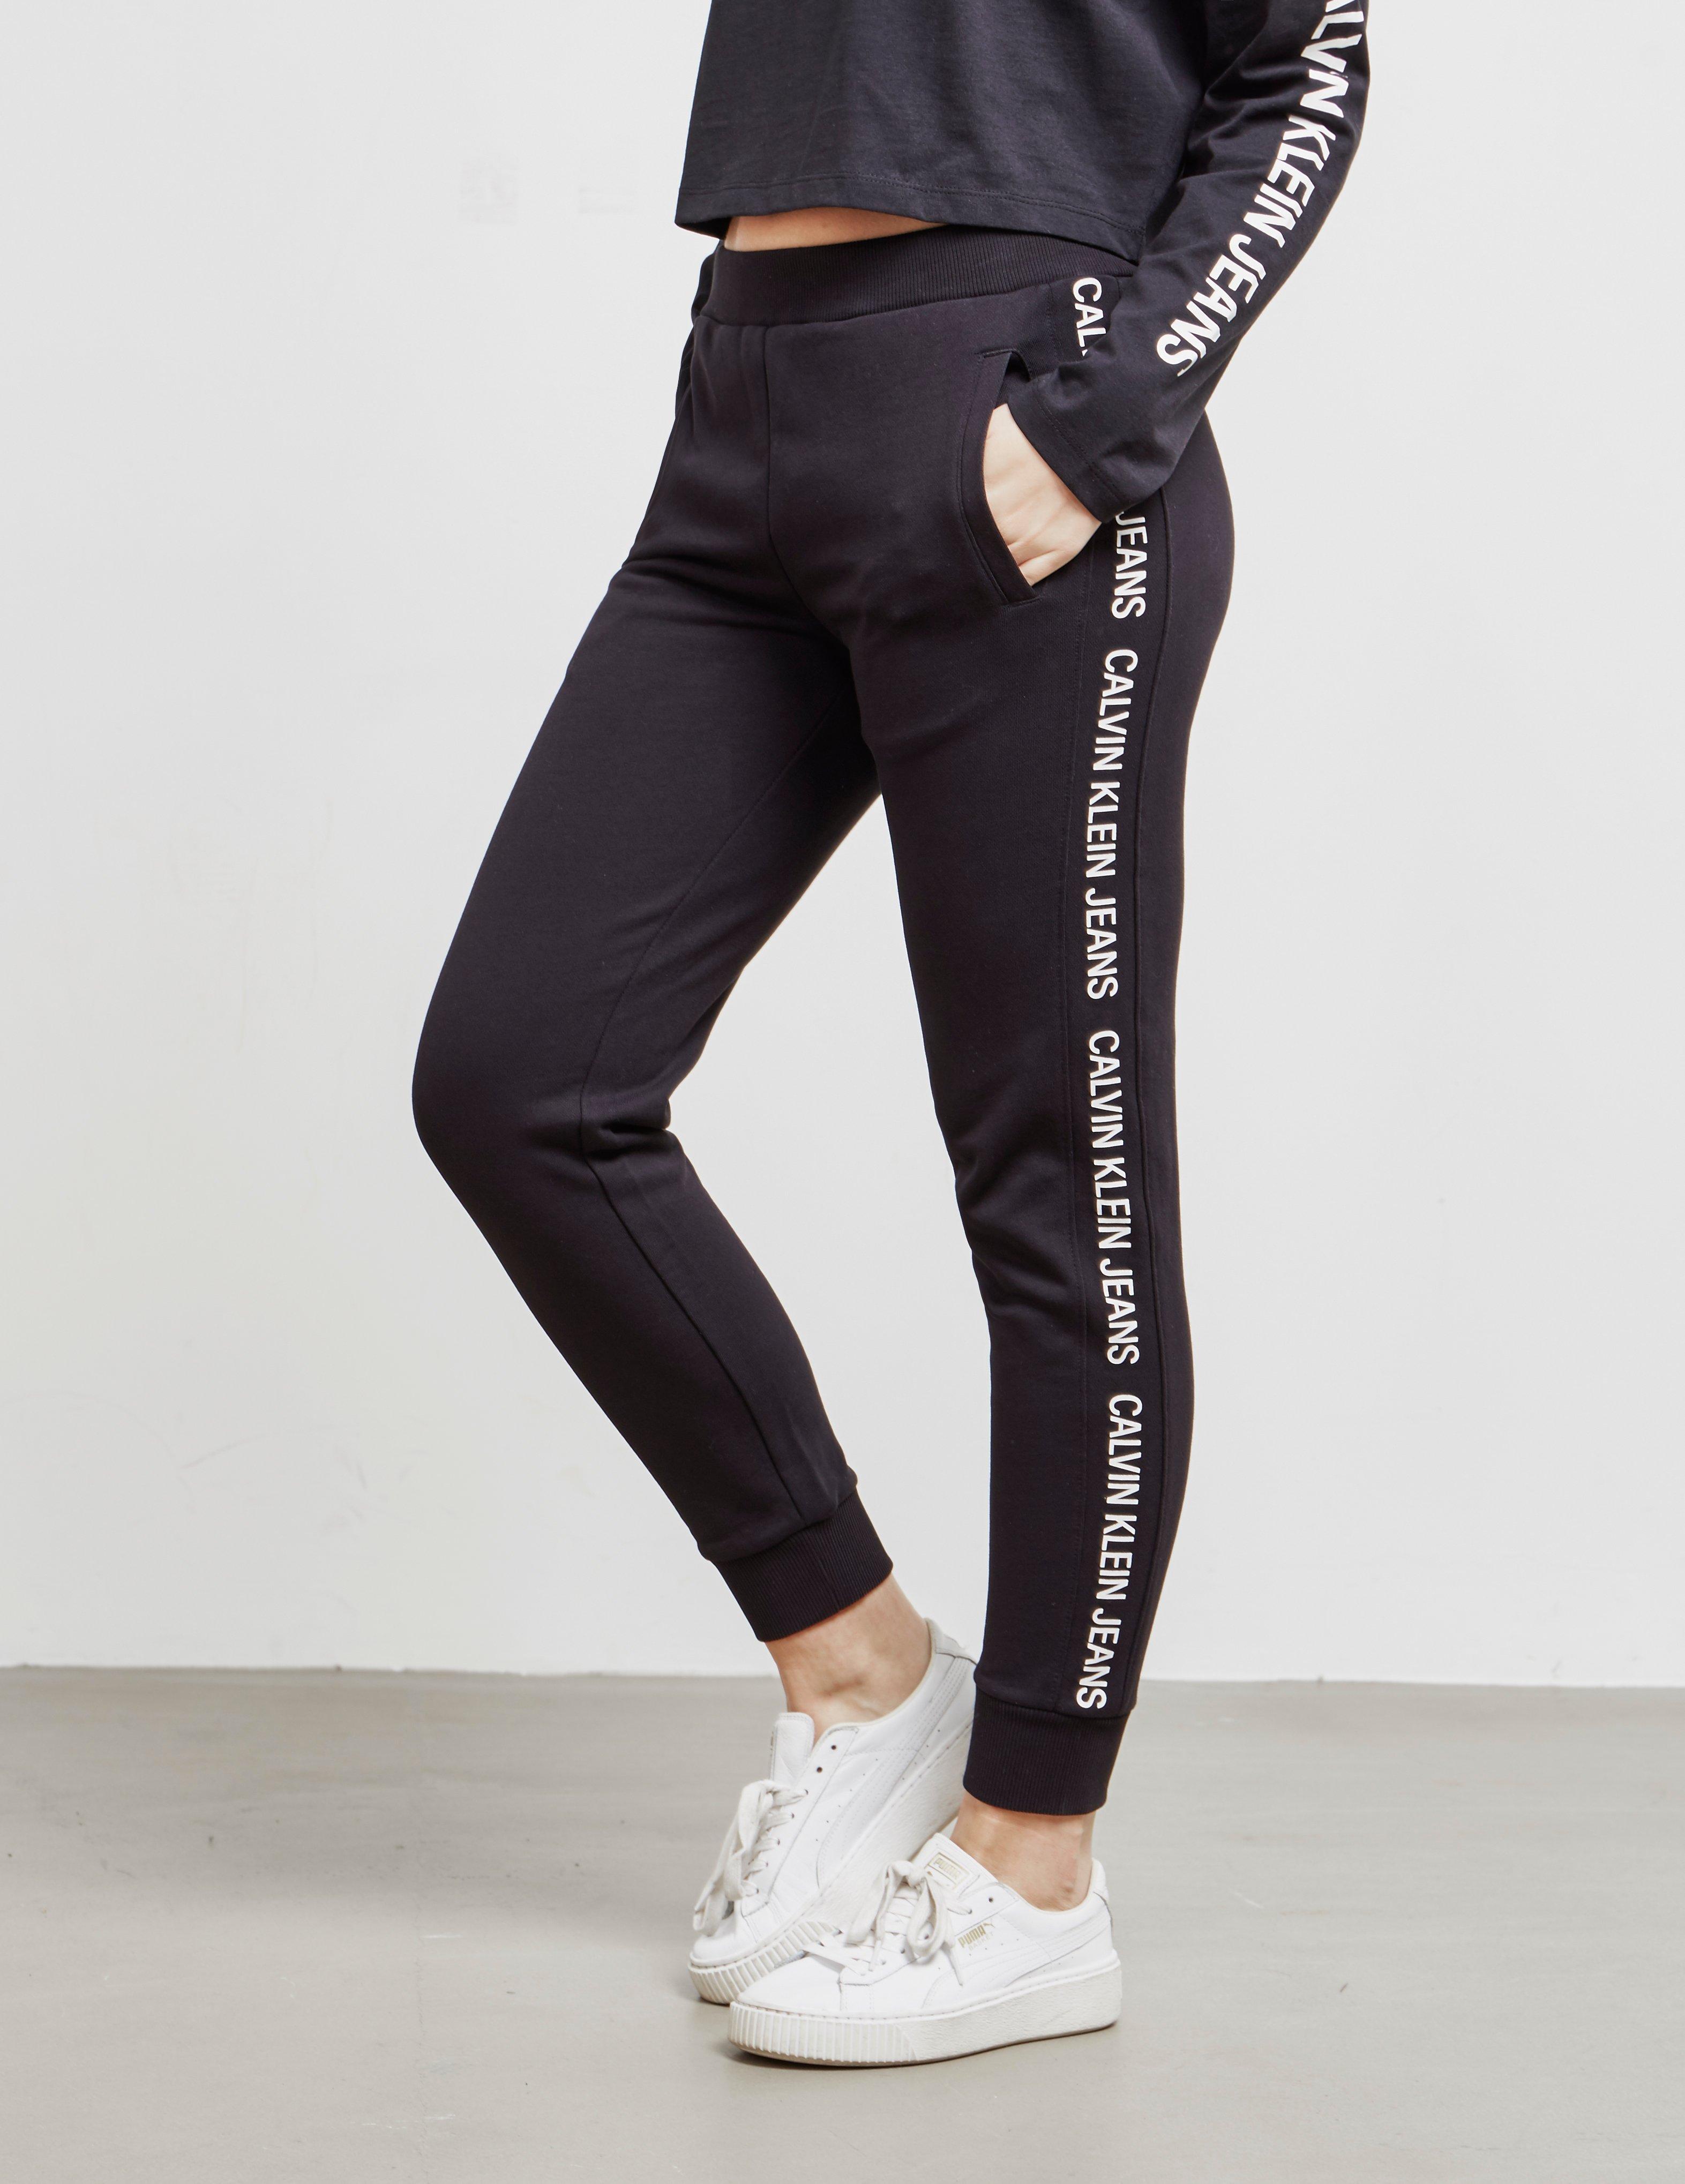 calvin klien womens tracksuit Cheaper Than Retail Price> Buy Clothing,  Accessories and lifestyle products for women & men -